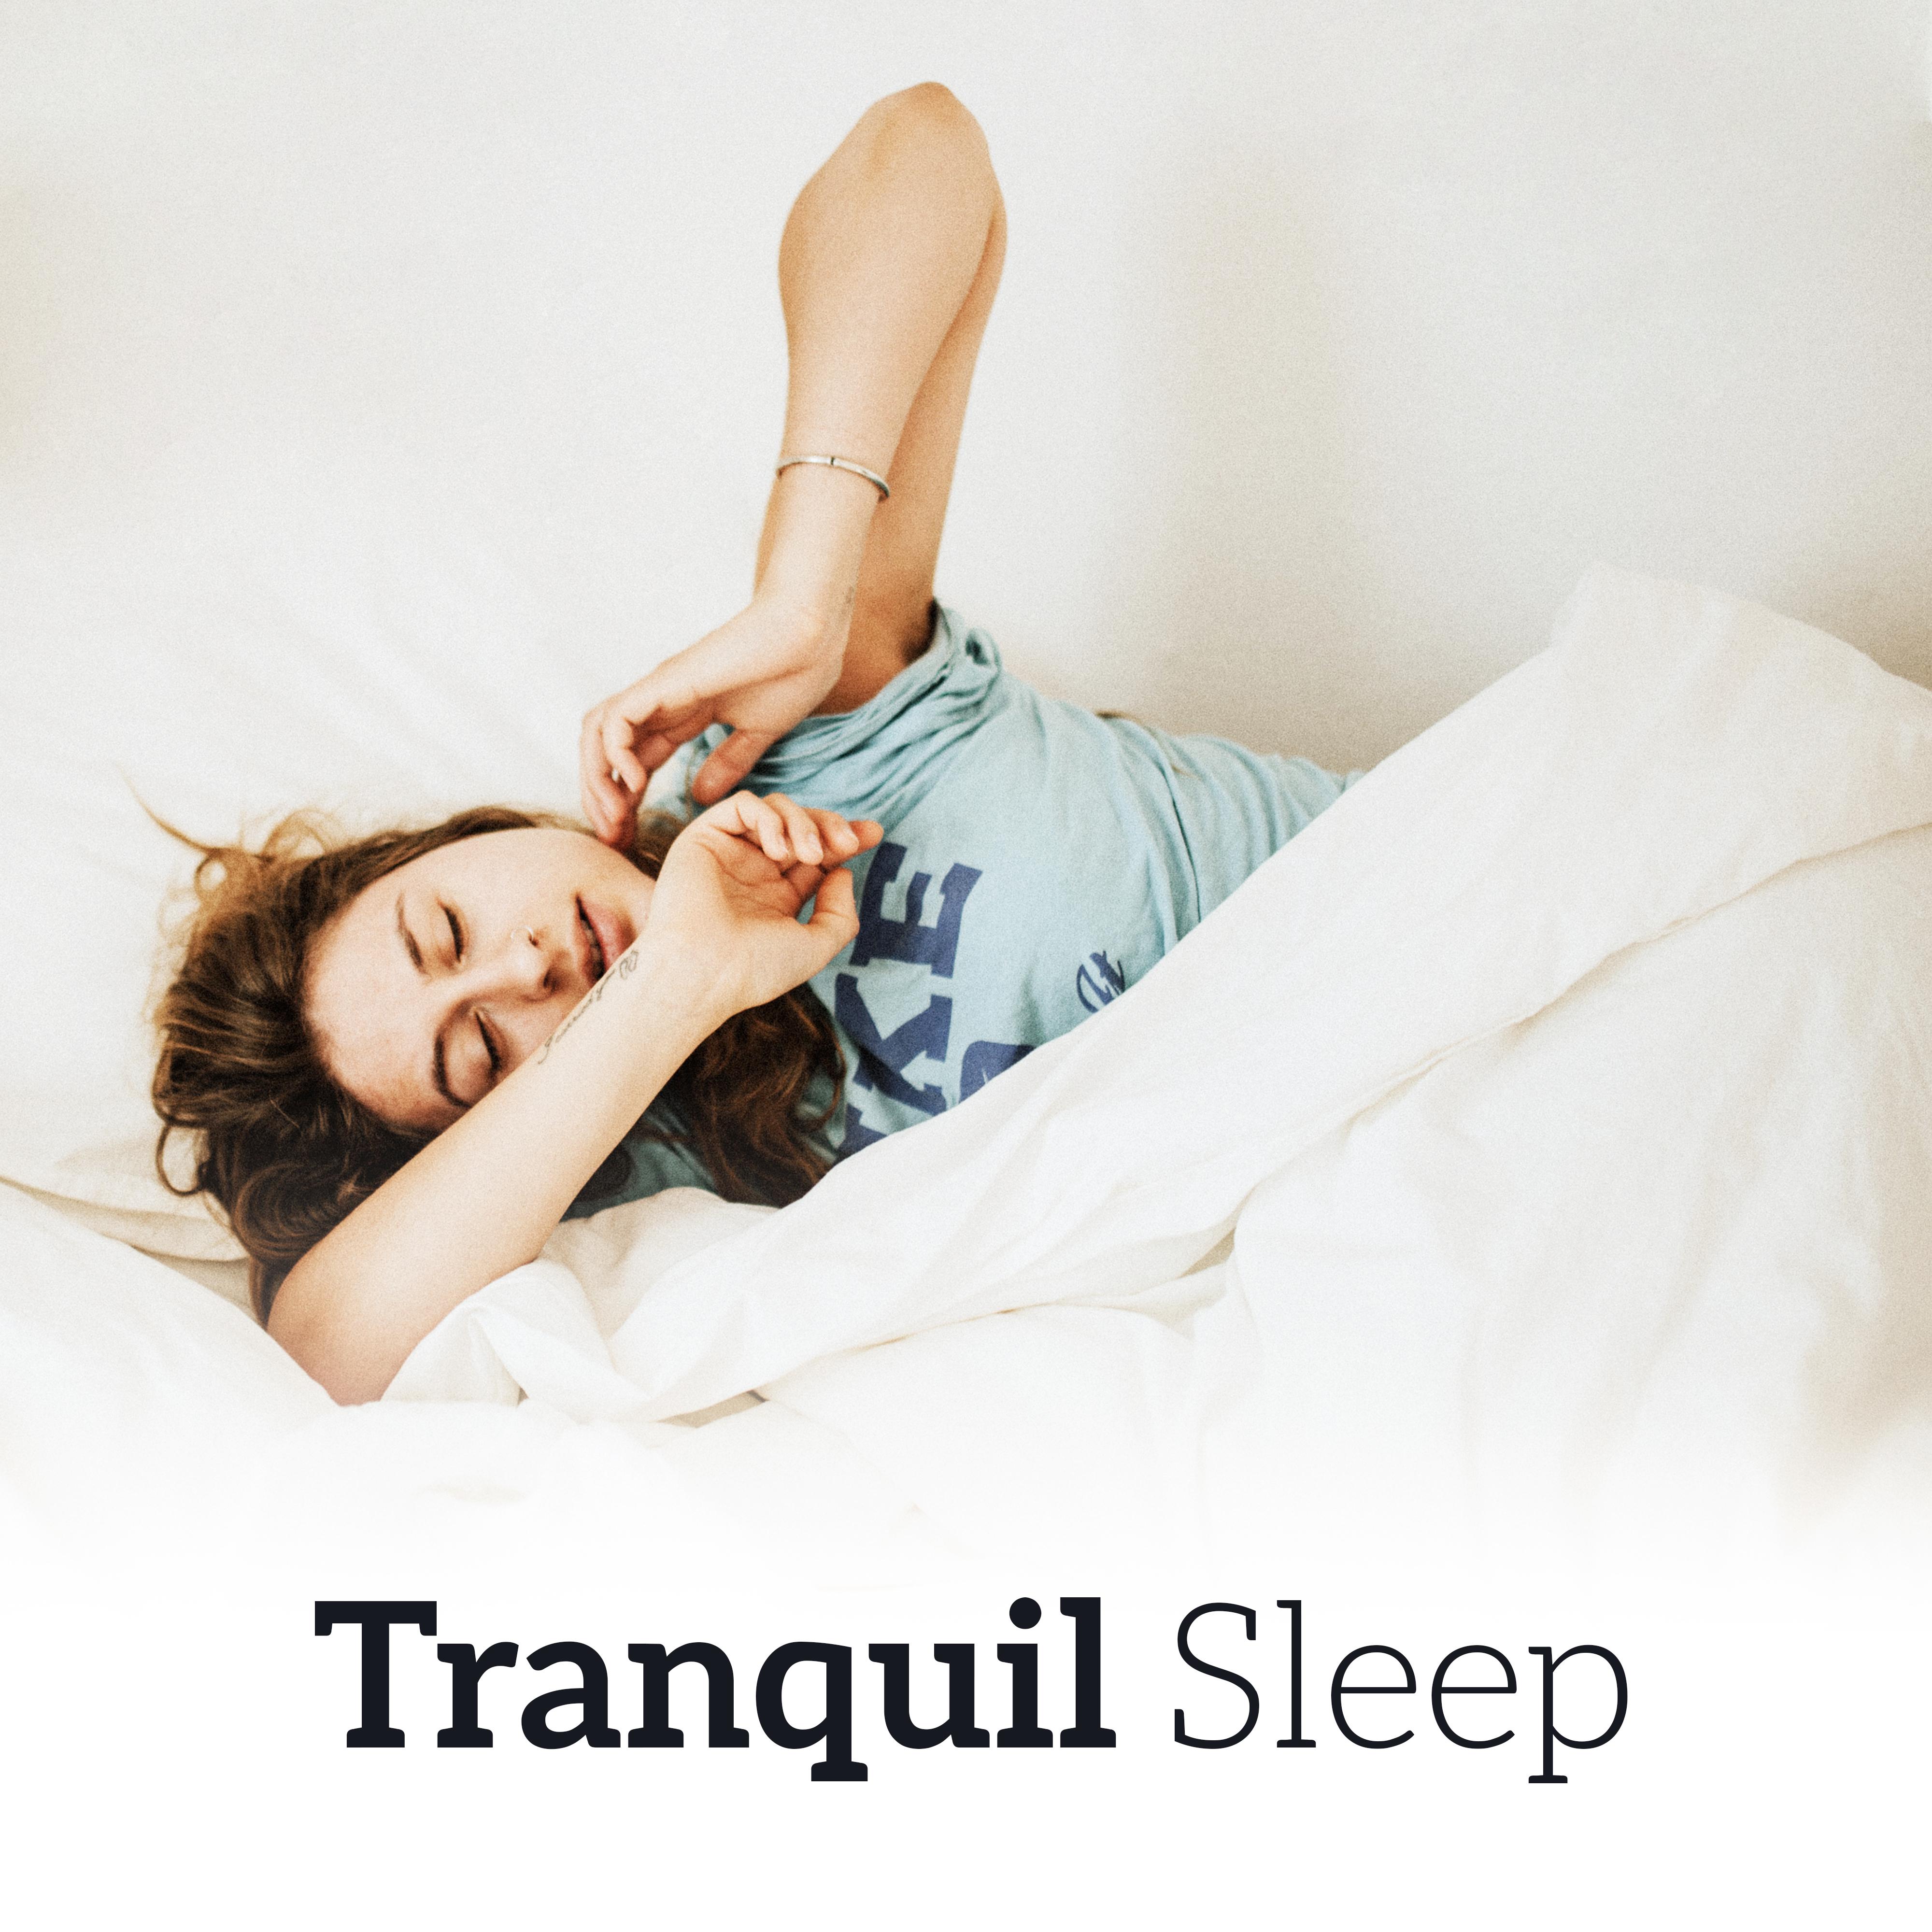 Tranquil Sleep – Soft Sounds to Bed, Relax & Chill, Restful Sleep, Soothing Piano, Music Reduces Stress, Night Sounds